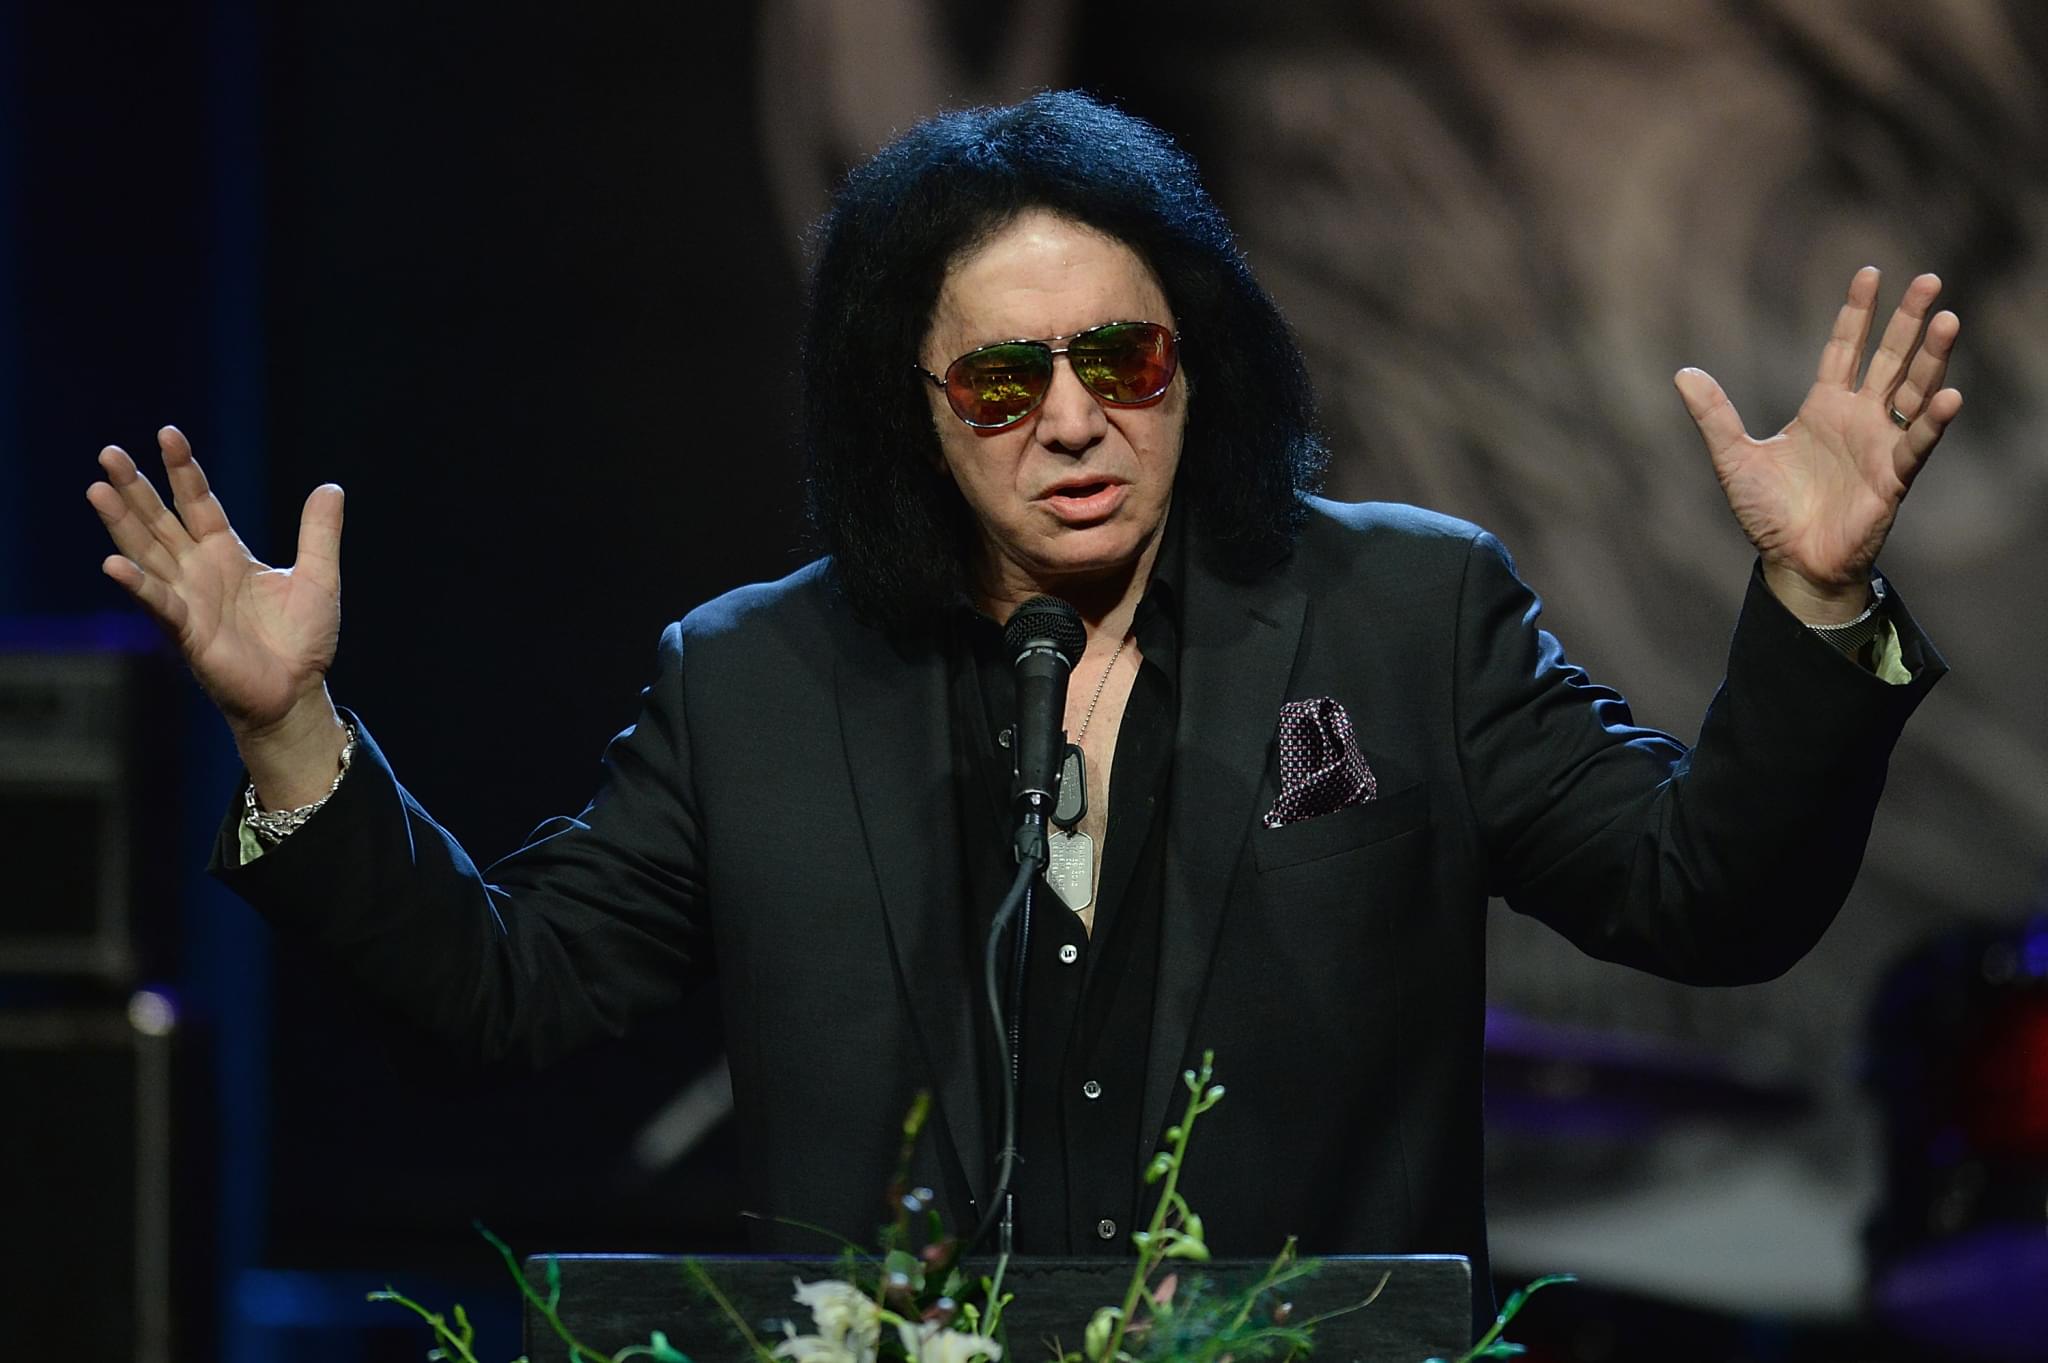 Gene Simmons says Ace and Peter Chris turned down offer to return!